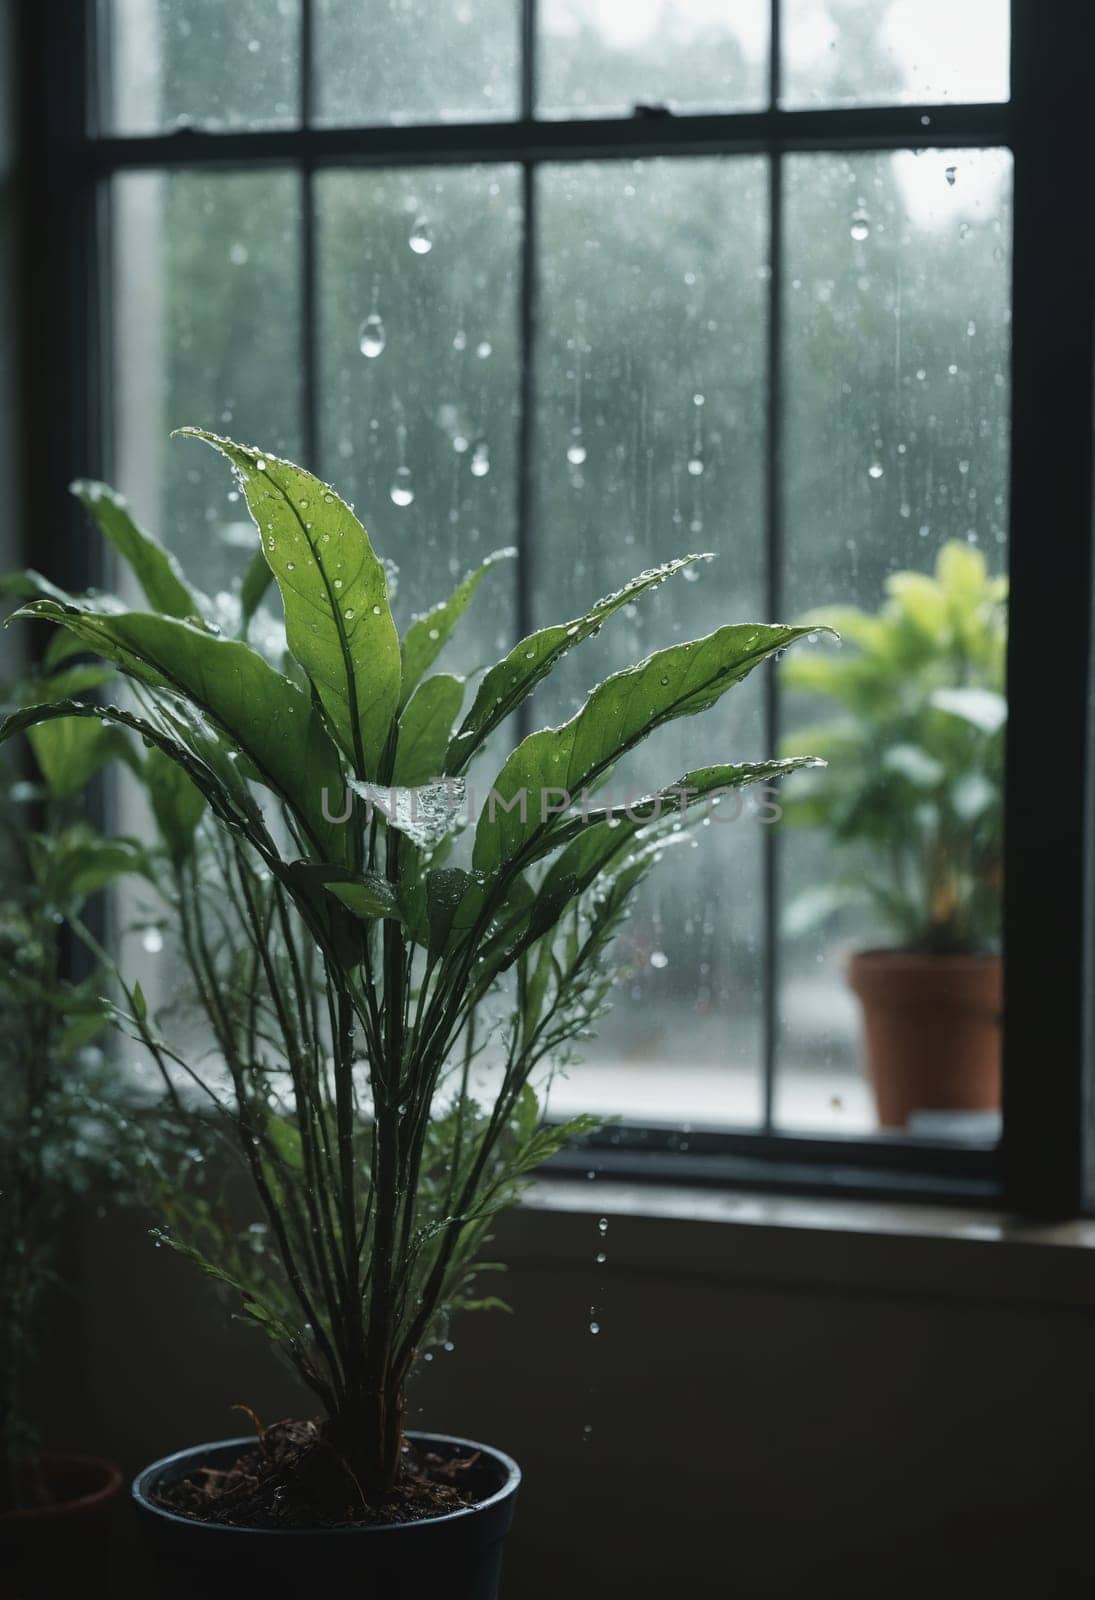 Embracing the Weather: Indoor Plant Nourished by Rain by Andre1ns